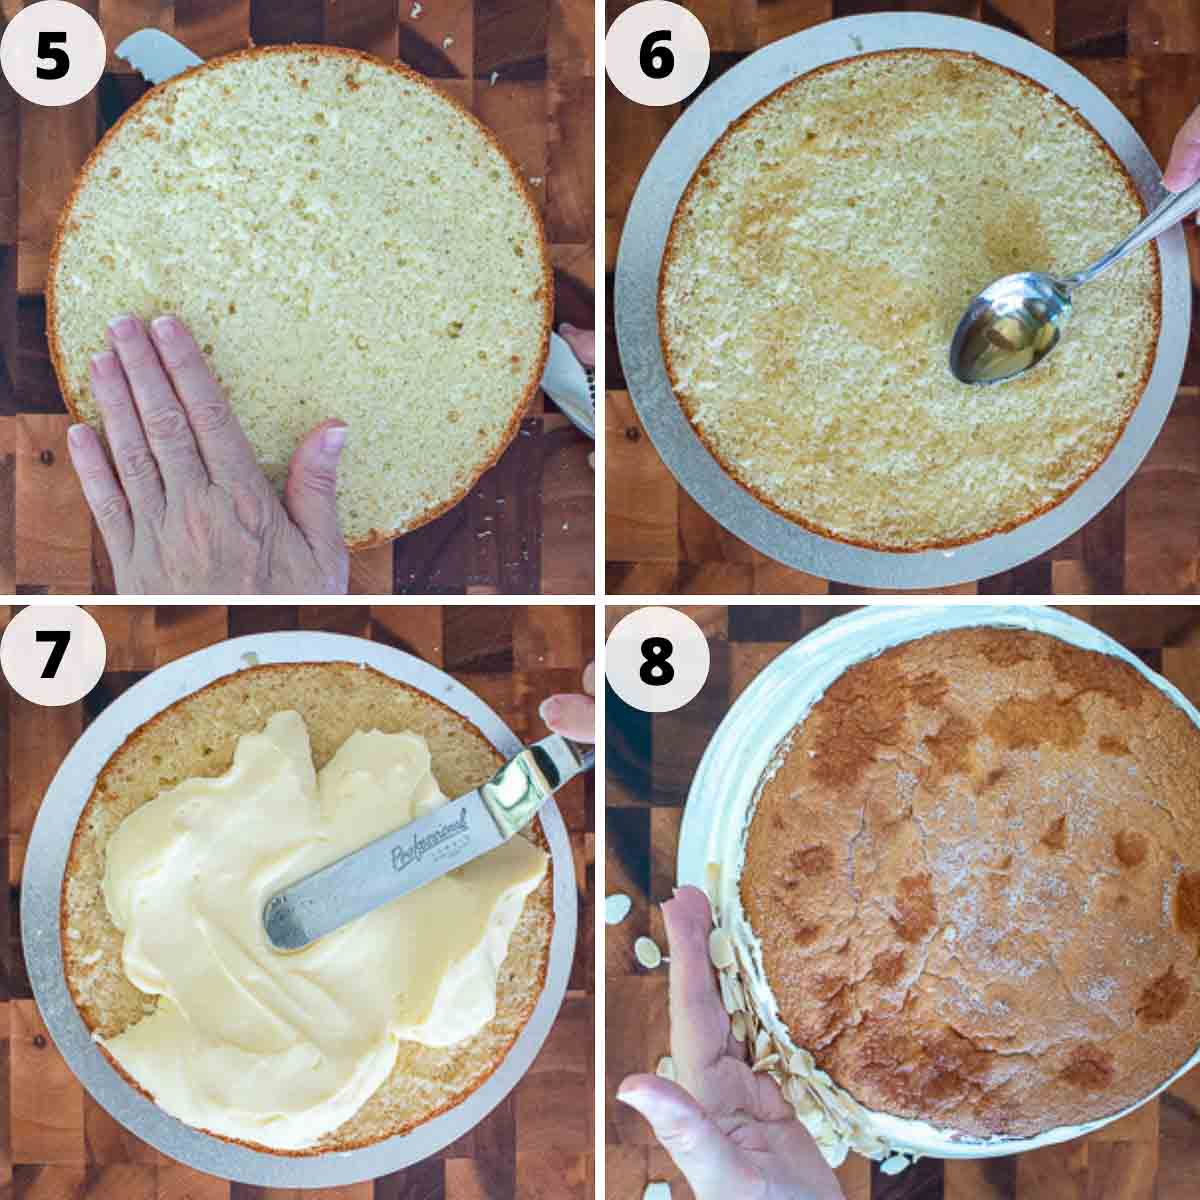 Four step process showing how to assemble this Italian cake.